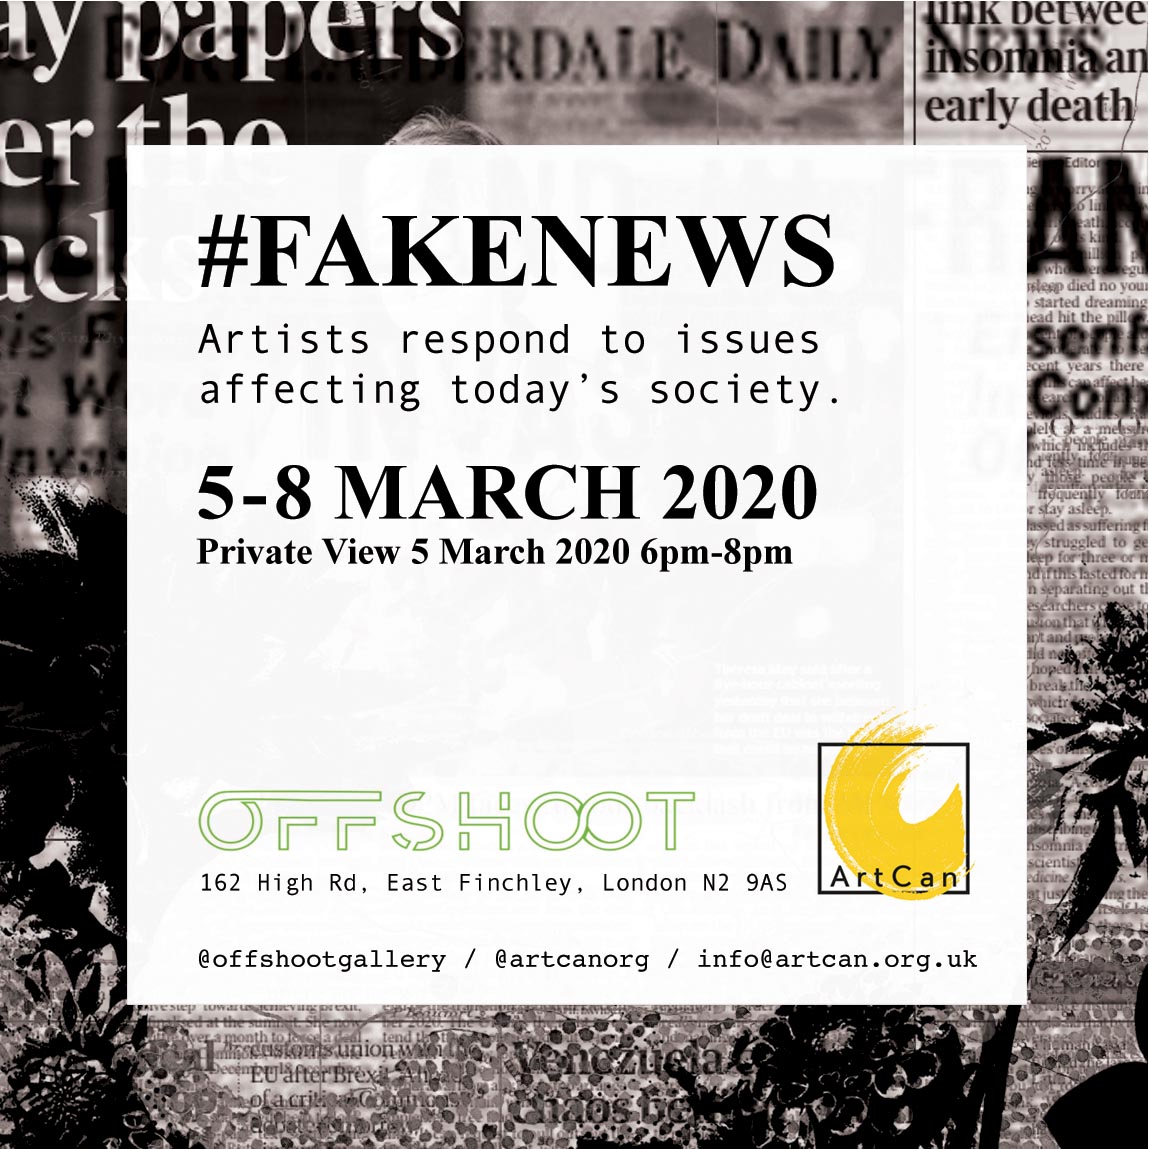 Today I have delivered my piece for @artcanorg group show #fakenews curated by @theworkshopn4 , @hollyinldn and @roshanutt held at @offshootgallery #finchley #london from 5 to 8 March. #fakenews2020 #londonevents #londonart 
#londonexhibition